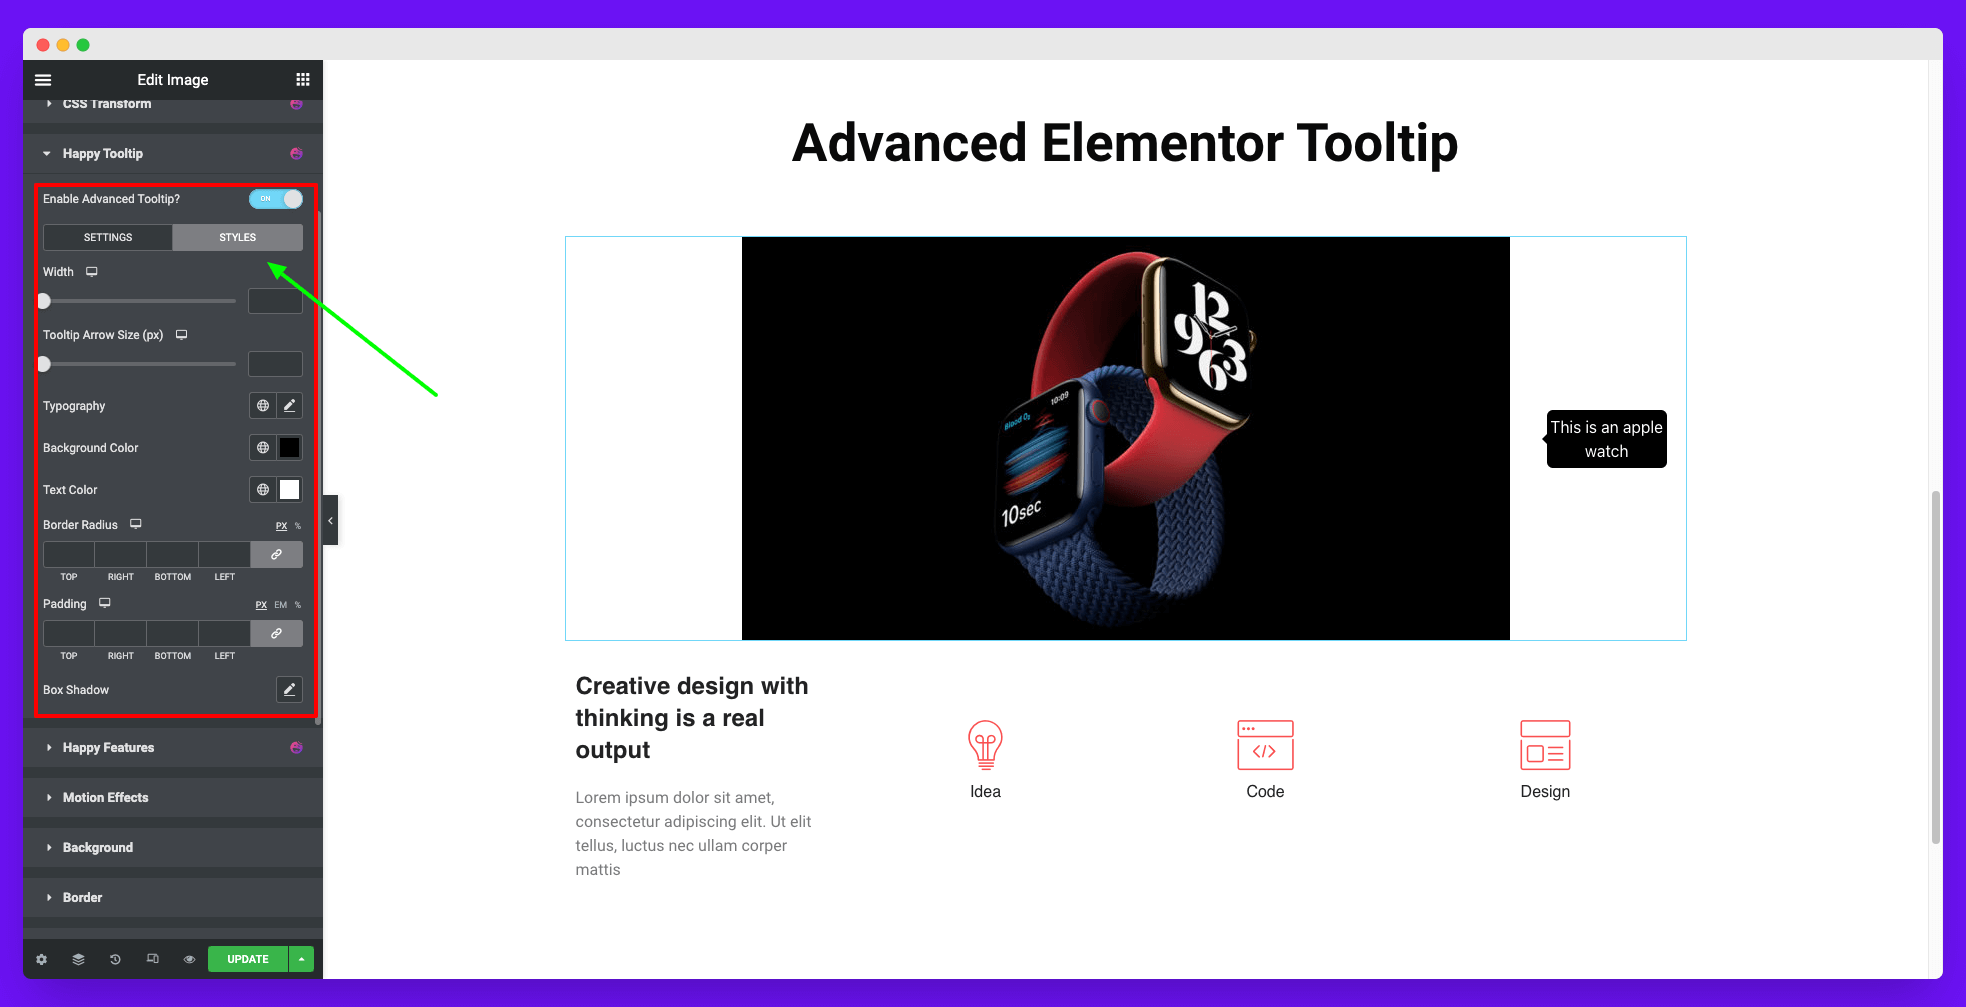 Stylize your Elementor tooltip with advanced options